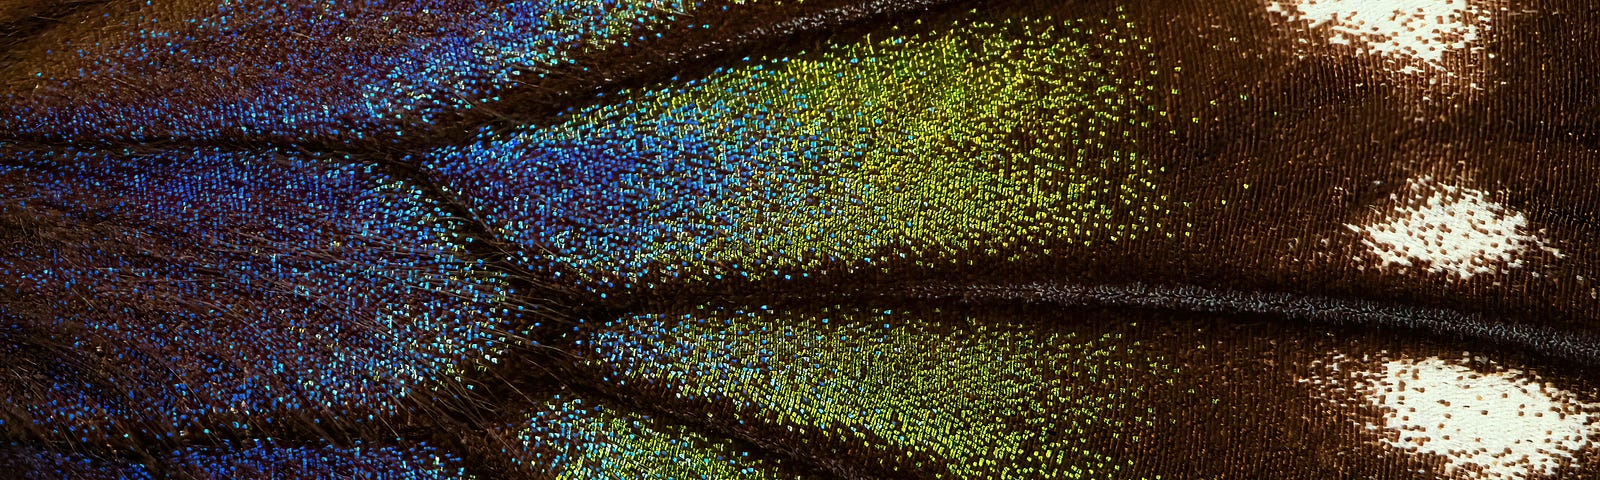 Close up of butterfly wing, showing the individual motes of color